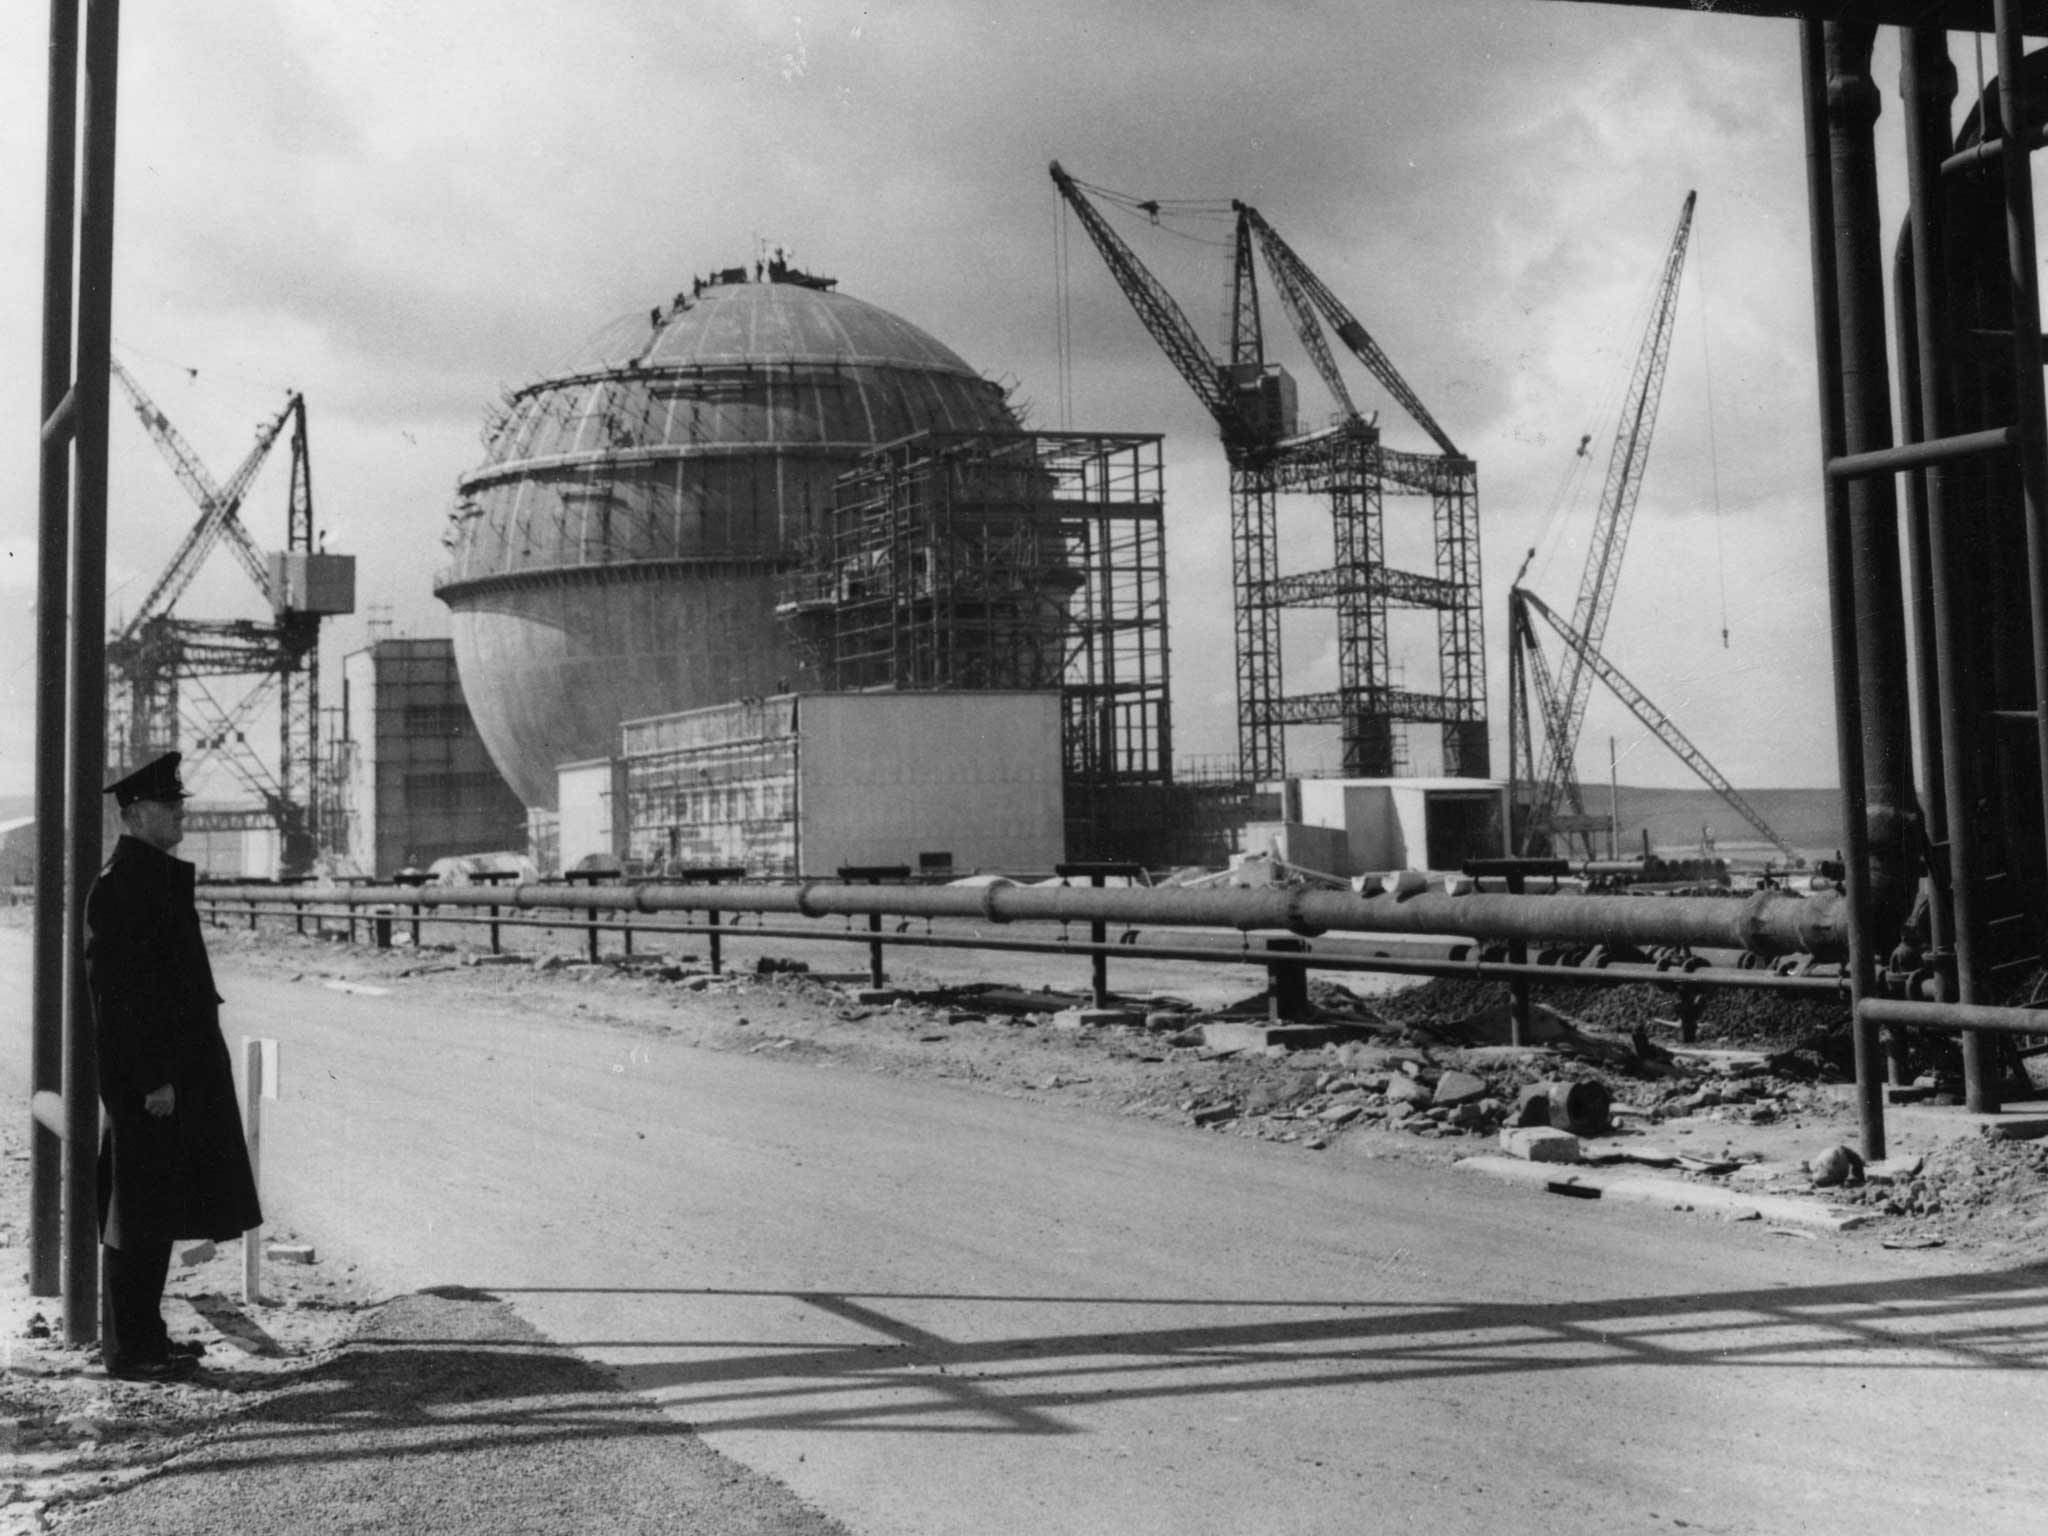 Dounreay in the 1950s - it was Britain's first fast reactor